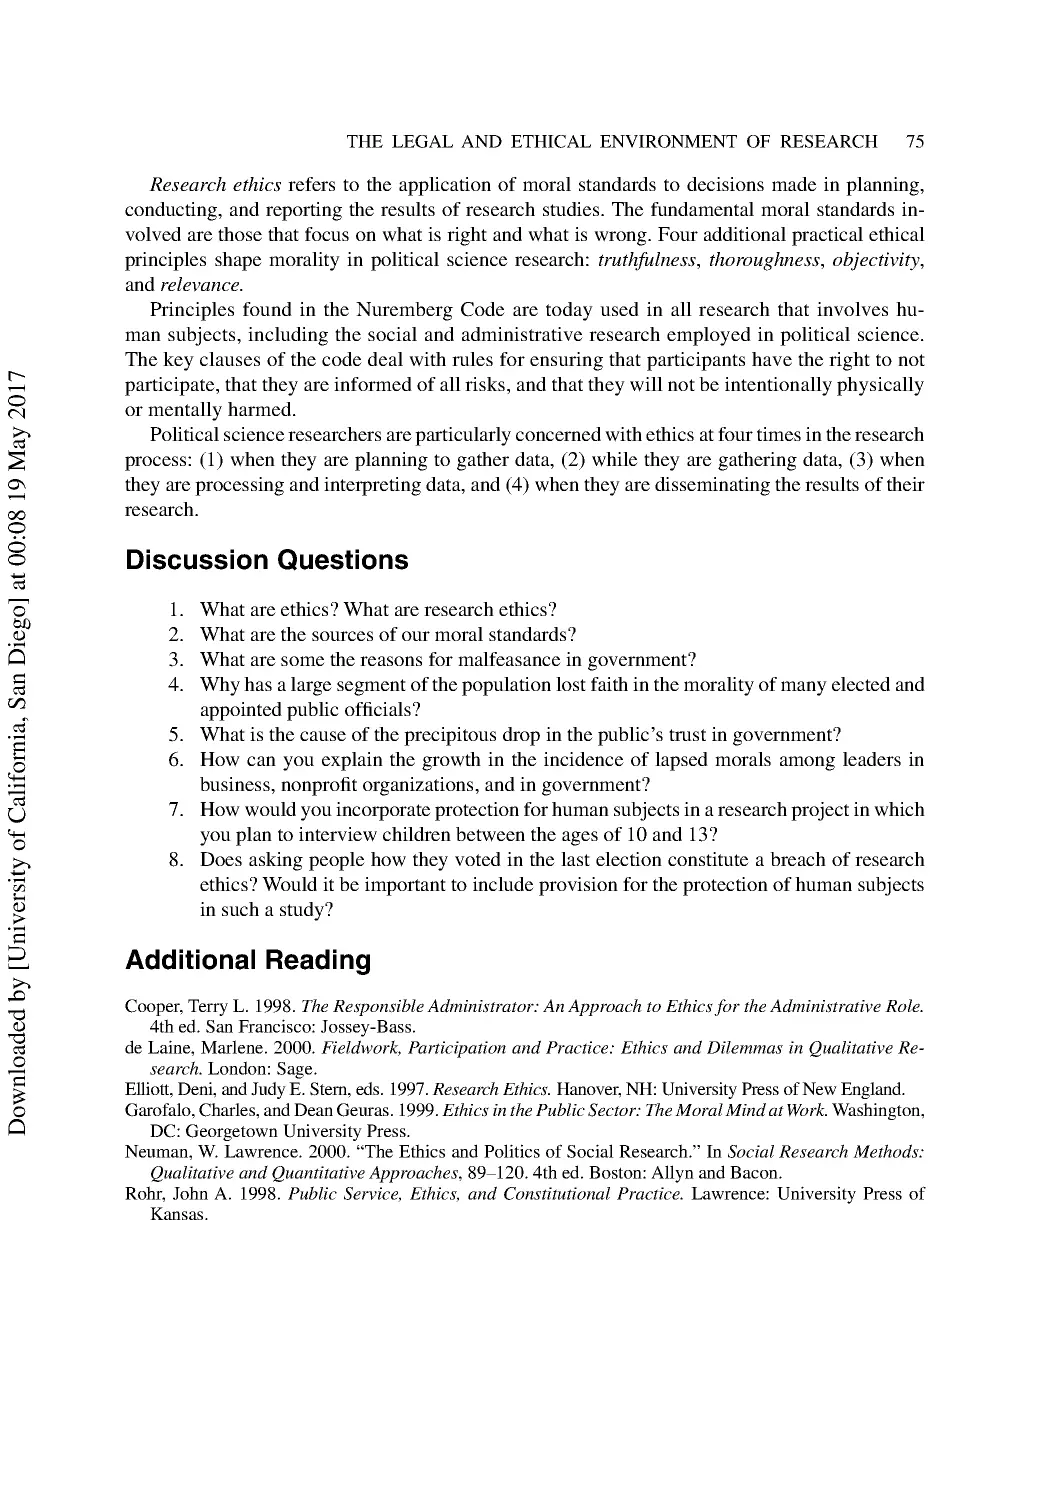 Discussion Questions
Additional Reading